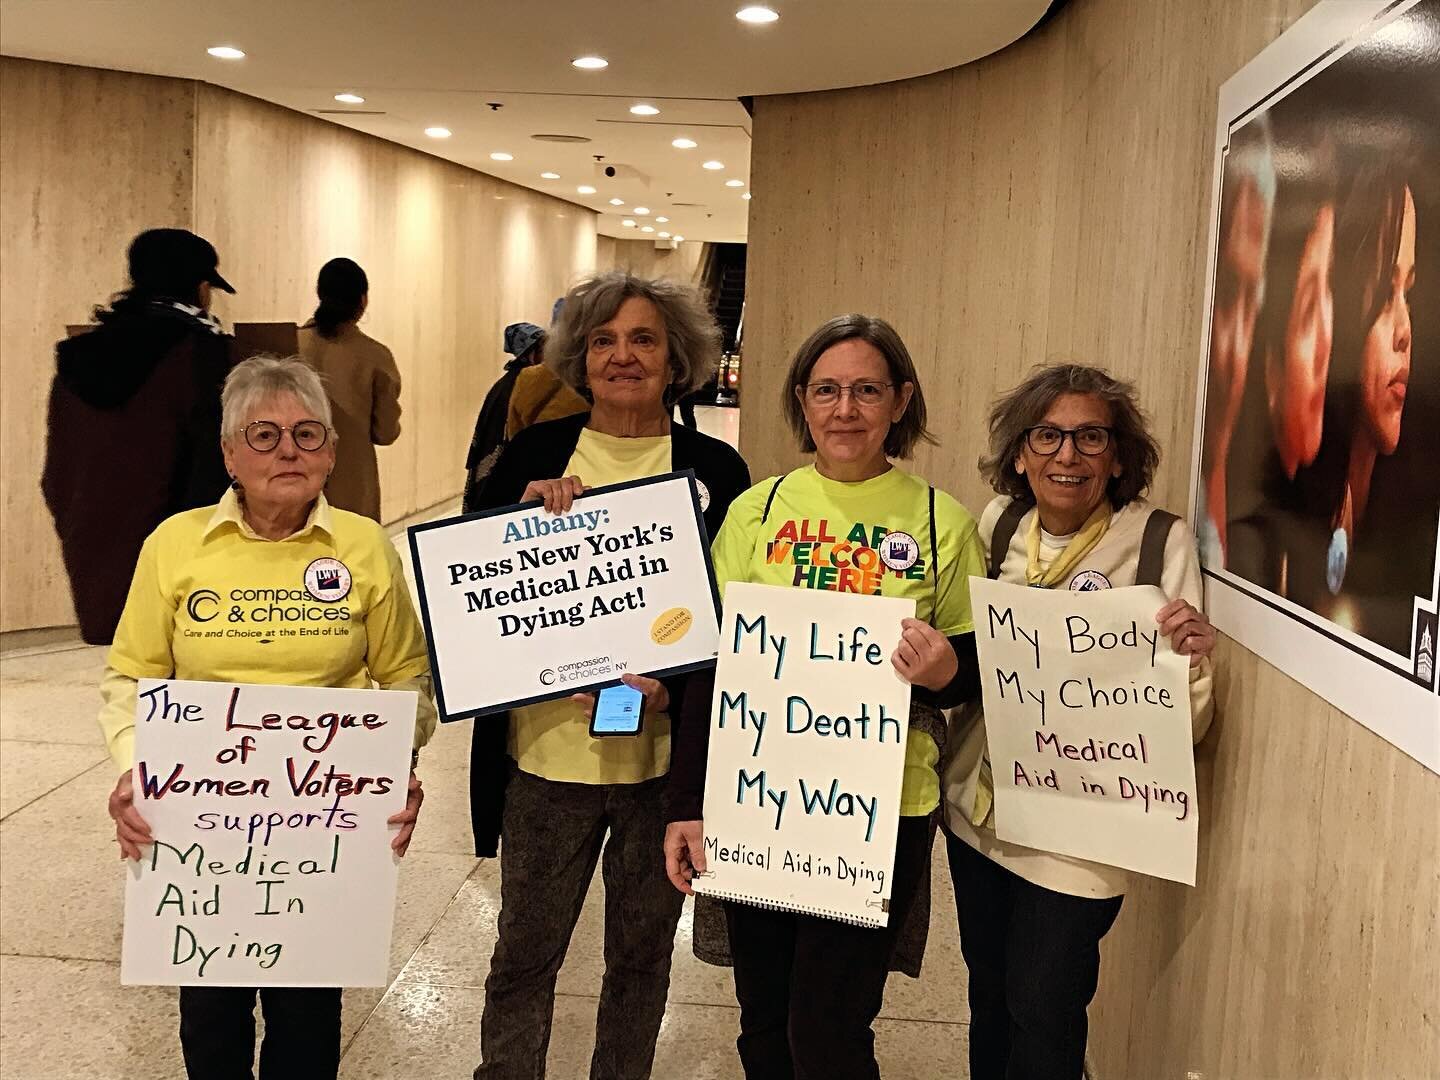 Barb, Kathy, Ann Marie and Ginny were representing our League at the State Capital advocating for Medical Aid In Dying today. LWVNY supports this issue.